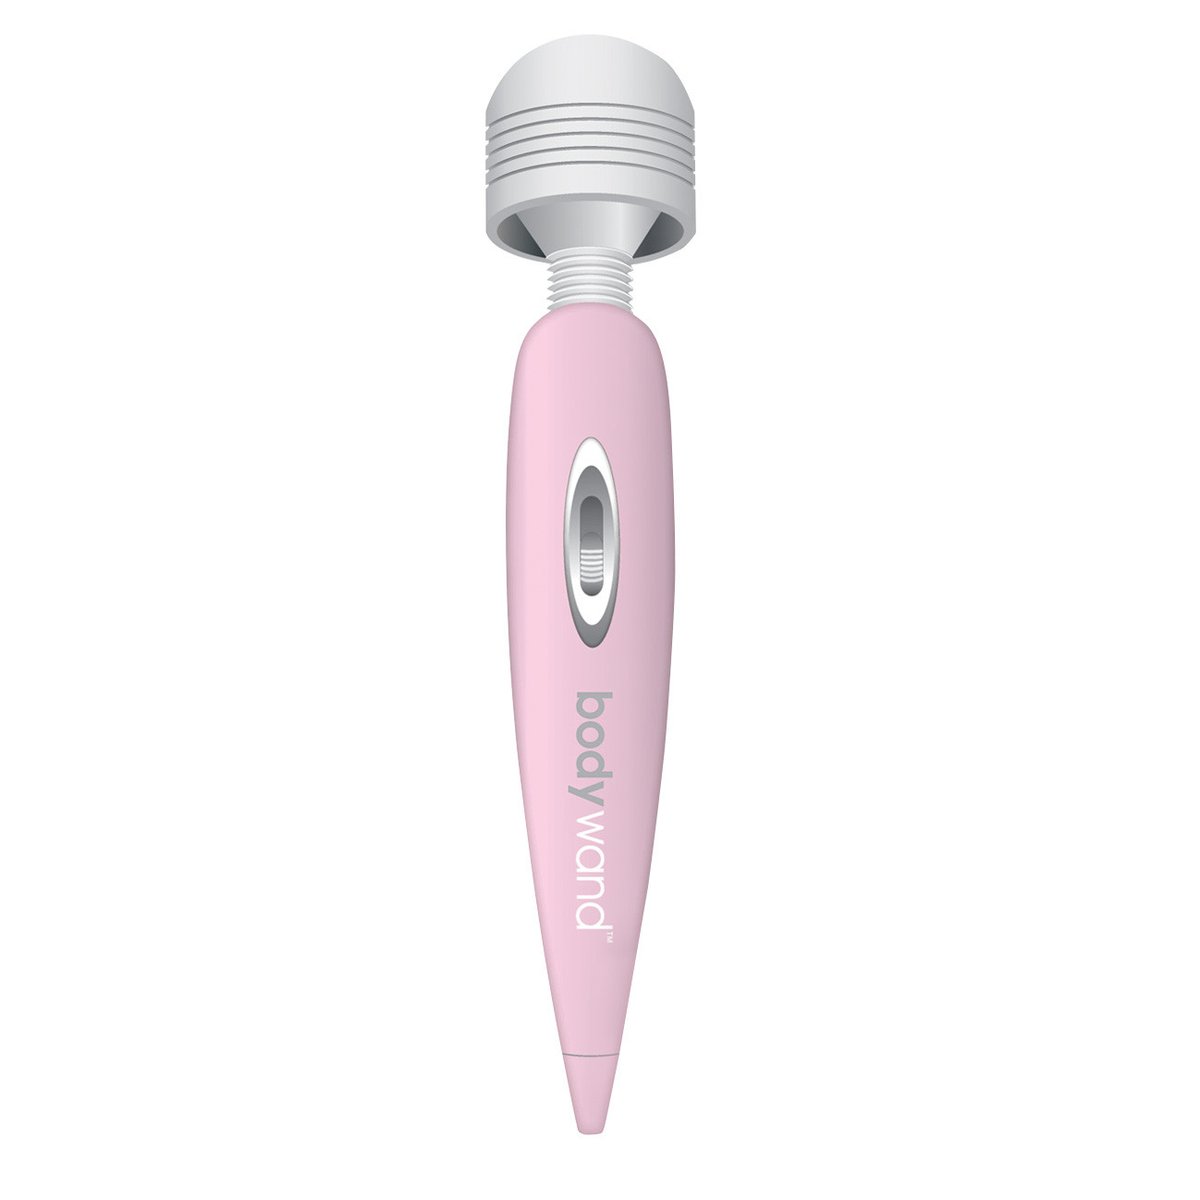 Bodywand - Rechargeable USB Wand Massager (Pink) Wand Massagers (Vibration) Rechargeable Durio Asia